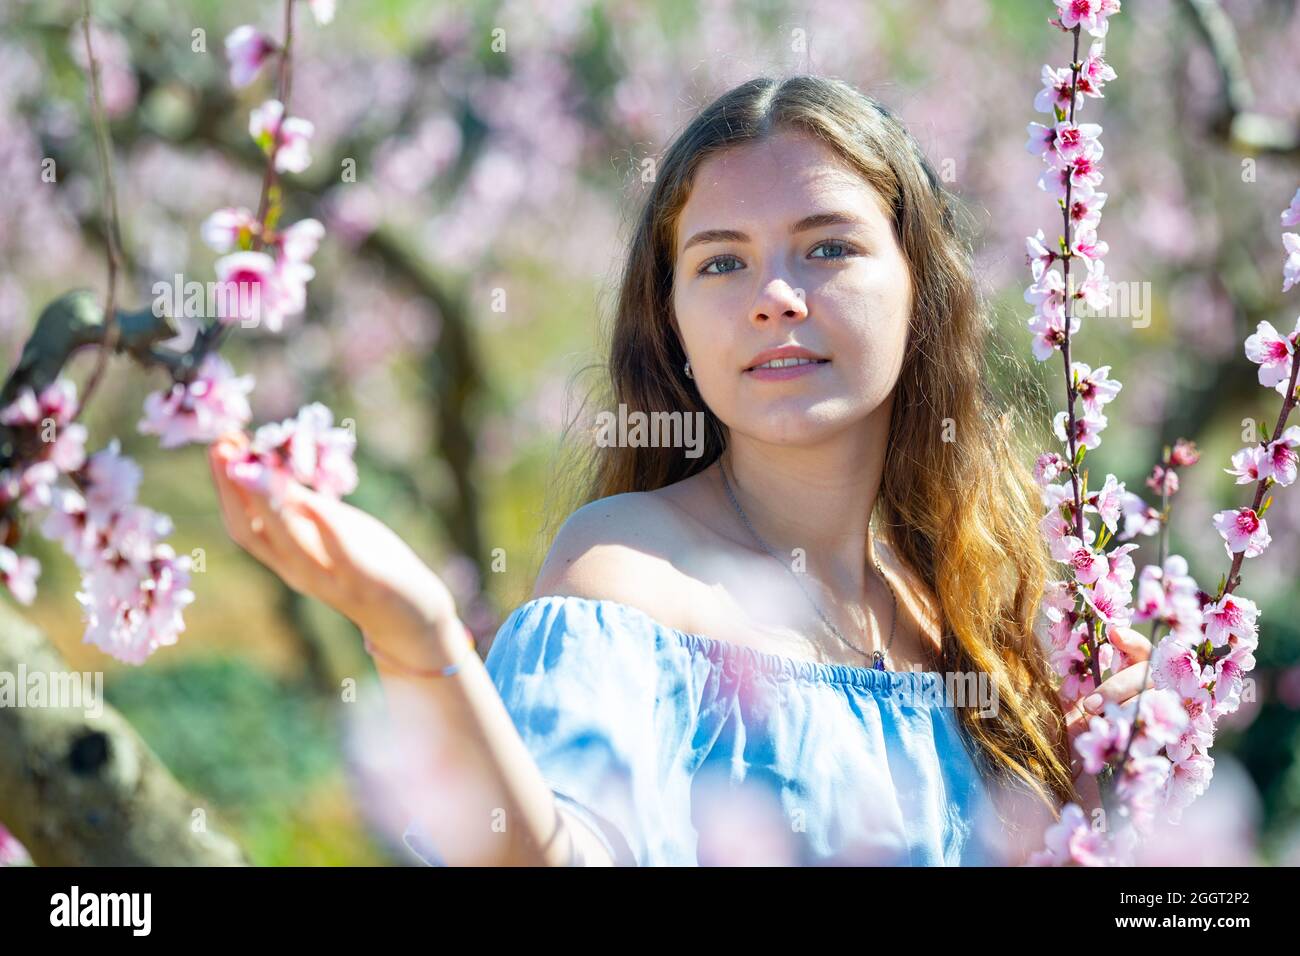 Portrait of young smiling woman in a garden with blooming peach trees Stock Photo